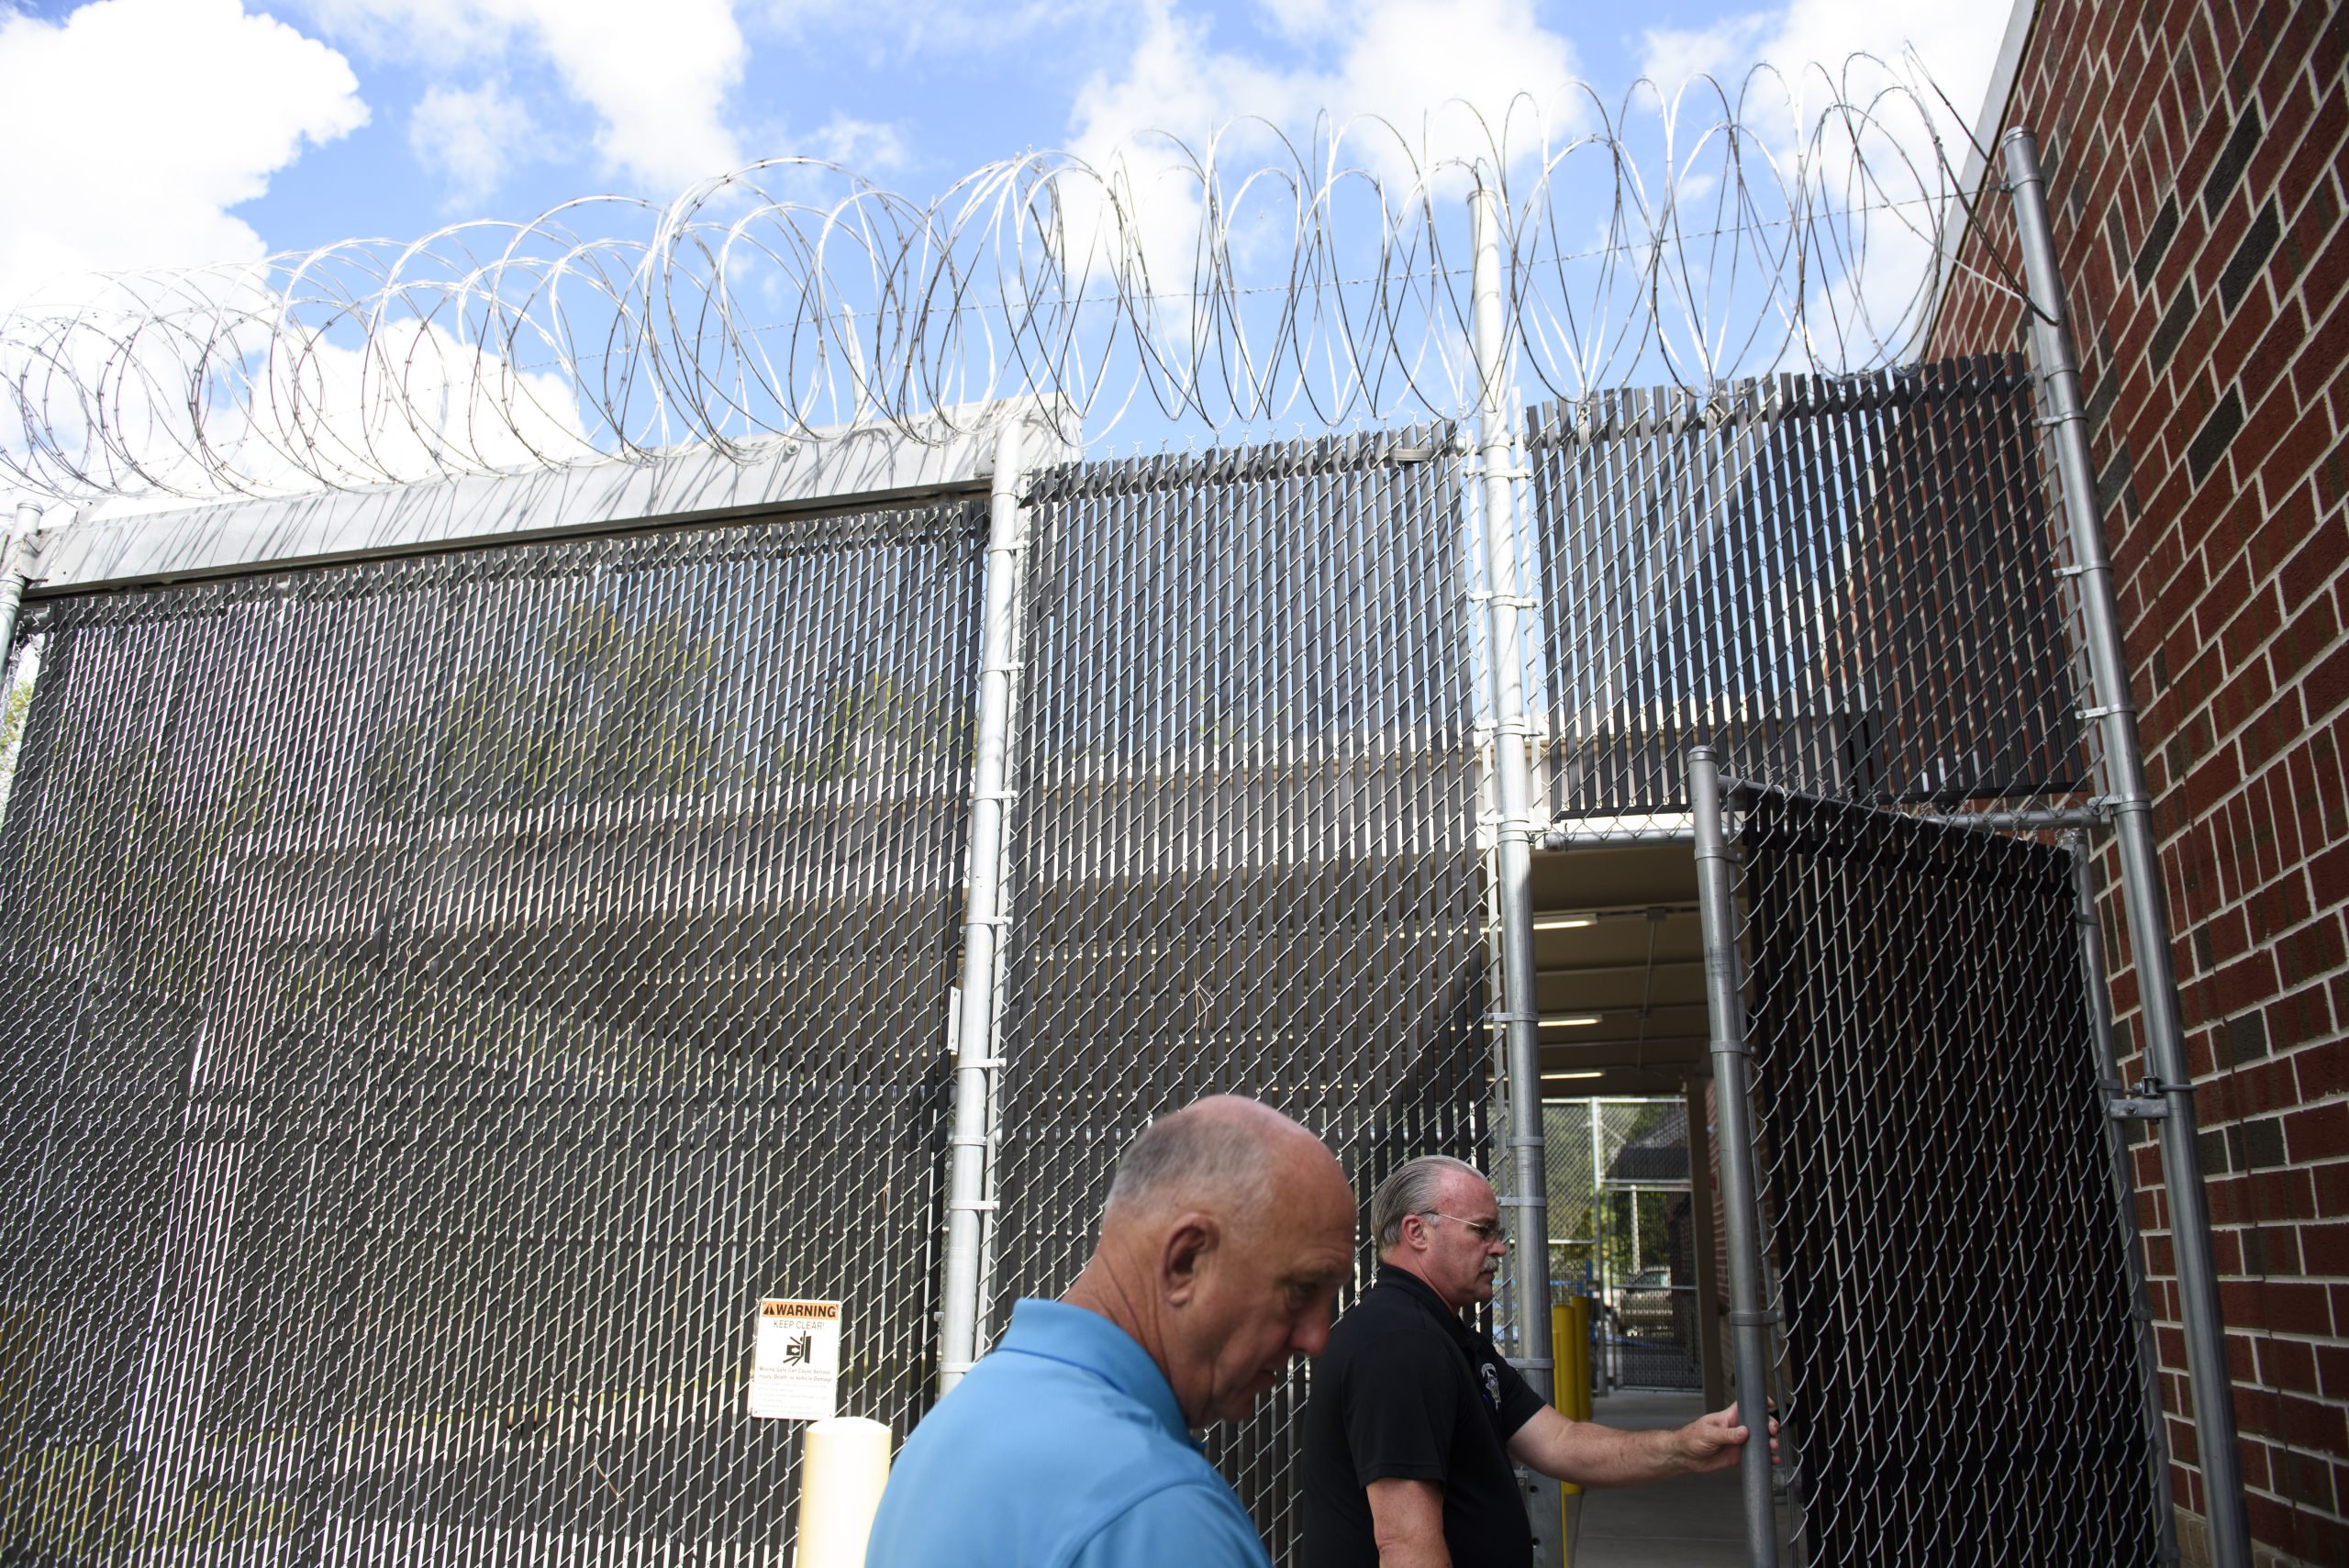 NC jails paid to house other governments’ detainees face tricky math, policy questions